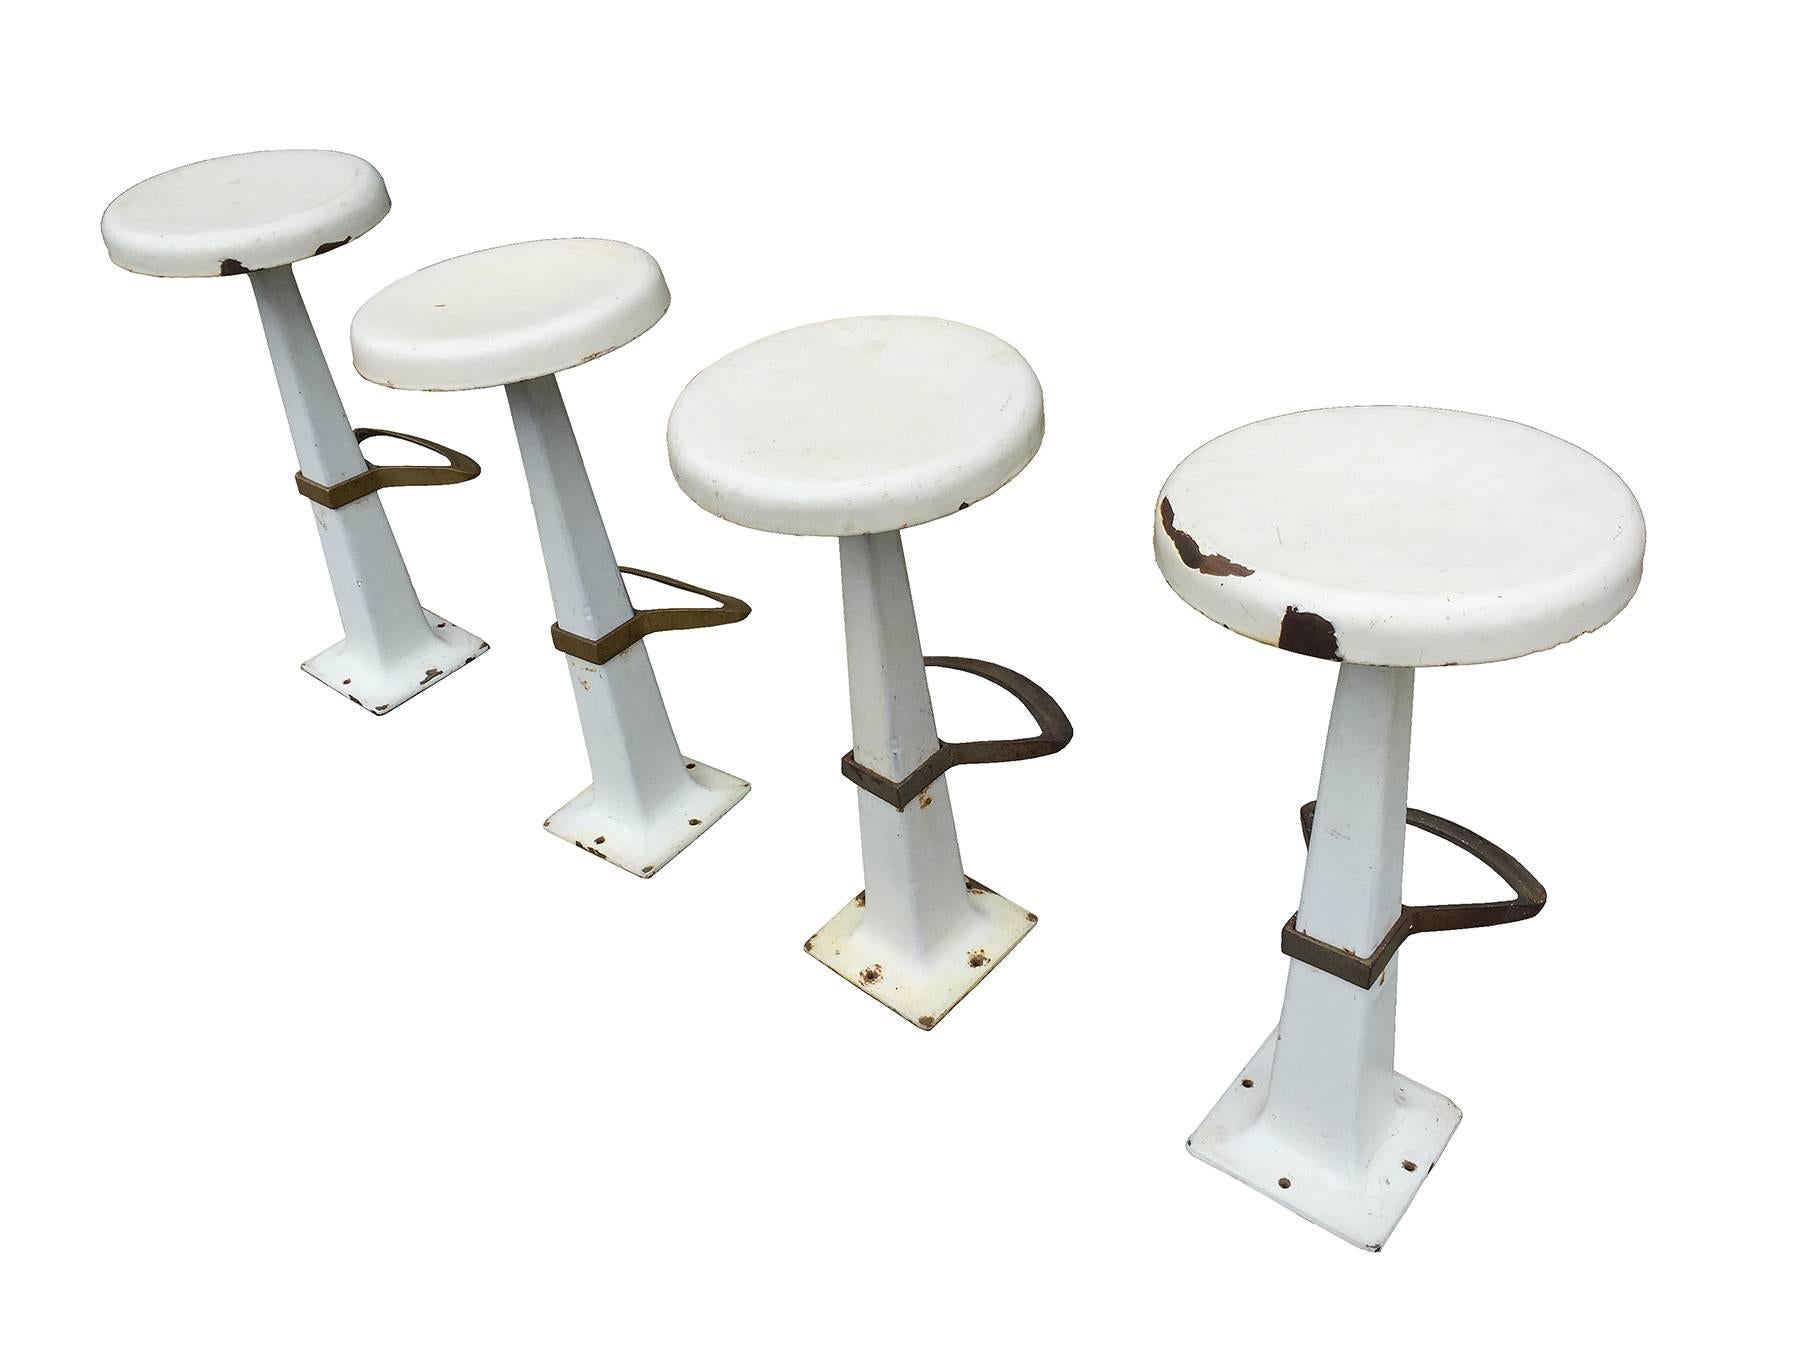 American Group of Four Beautiful White Enameled Metal Stools with Footrest, circa 1930